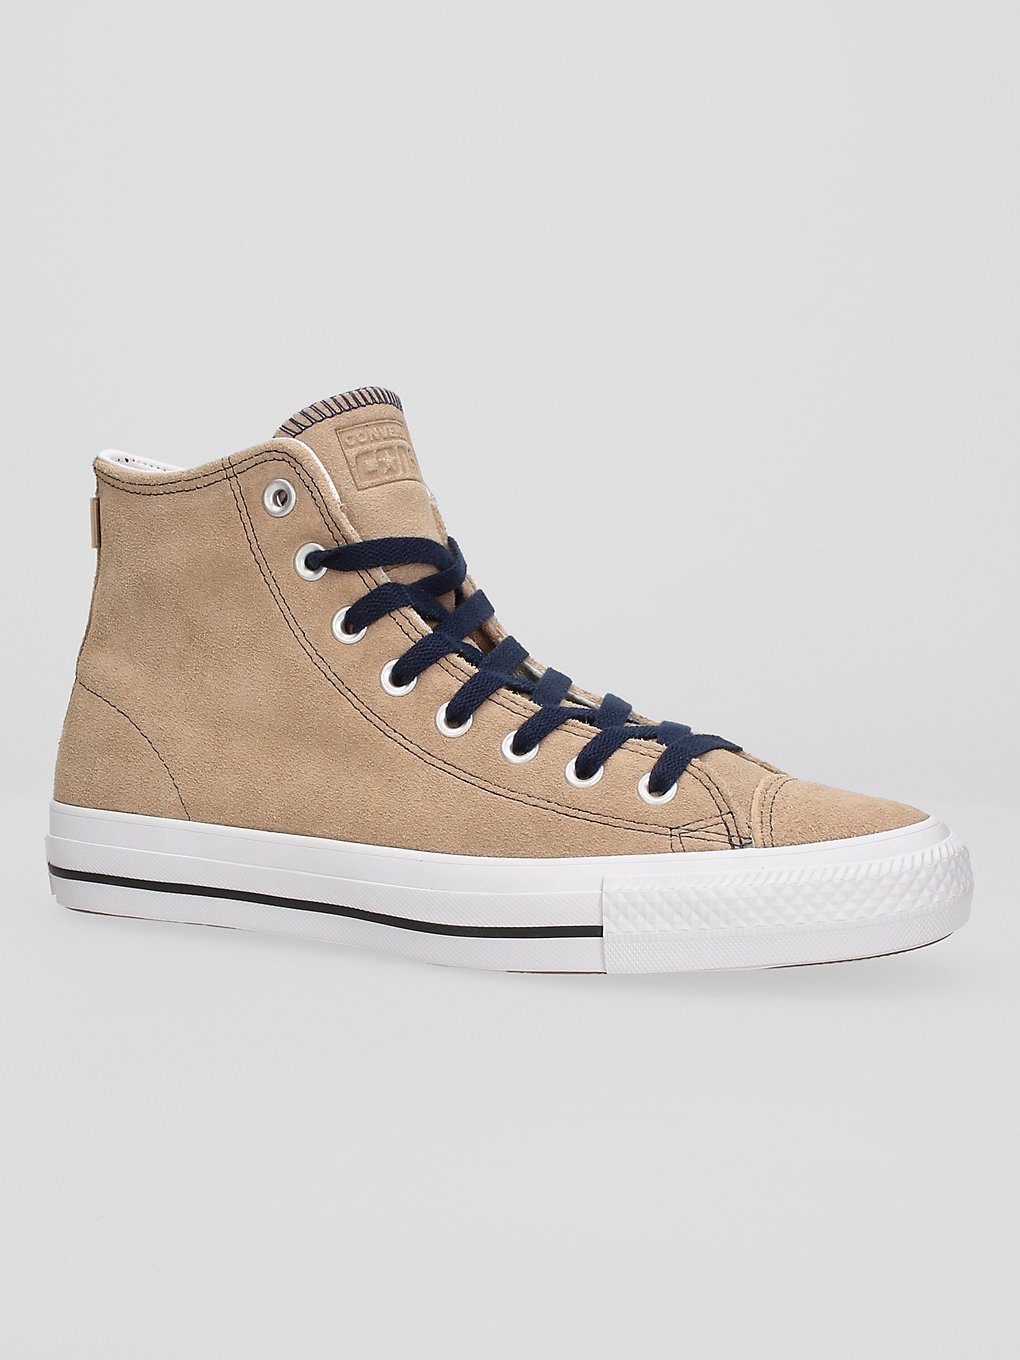 Converse Cons Chuck Taylor All Star Pro Suede Skate Shoes brun